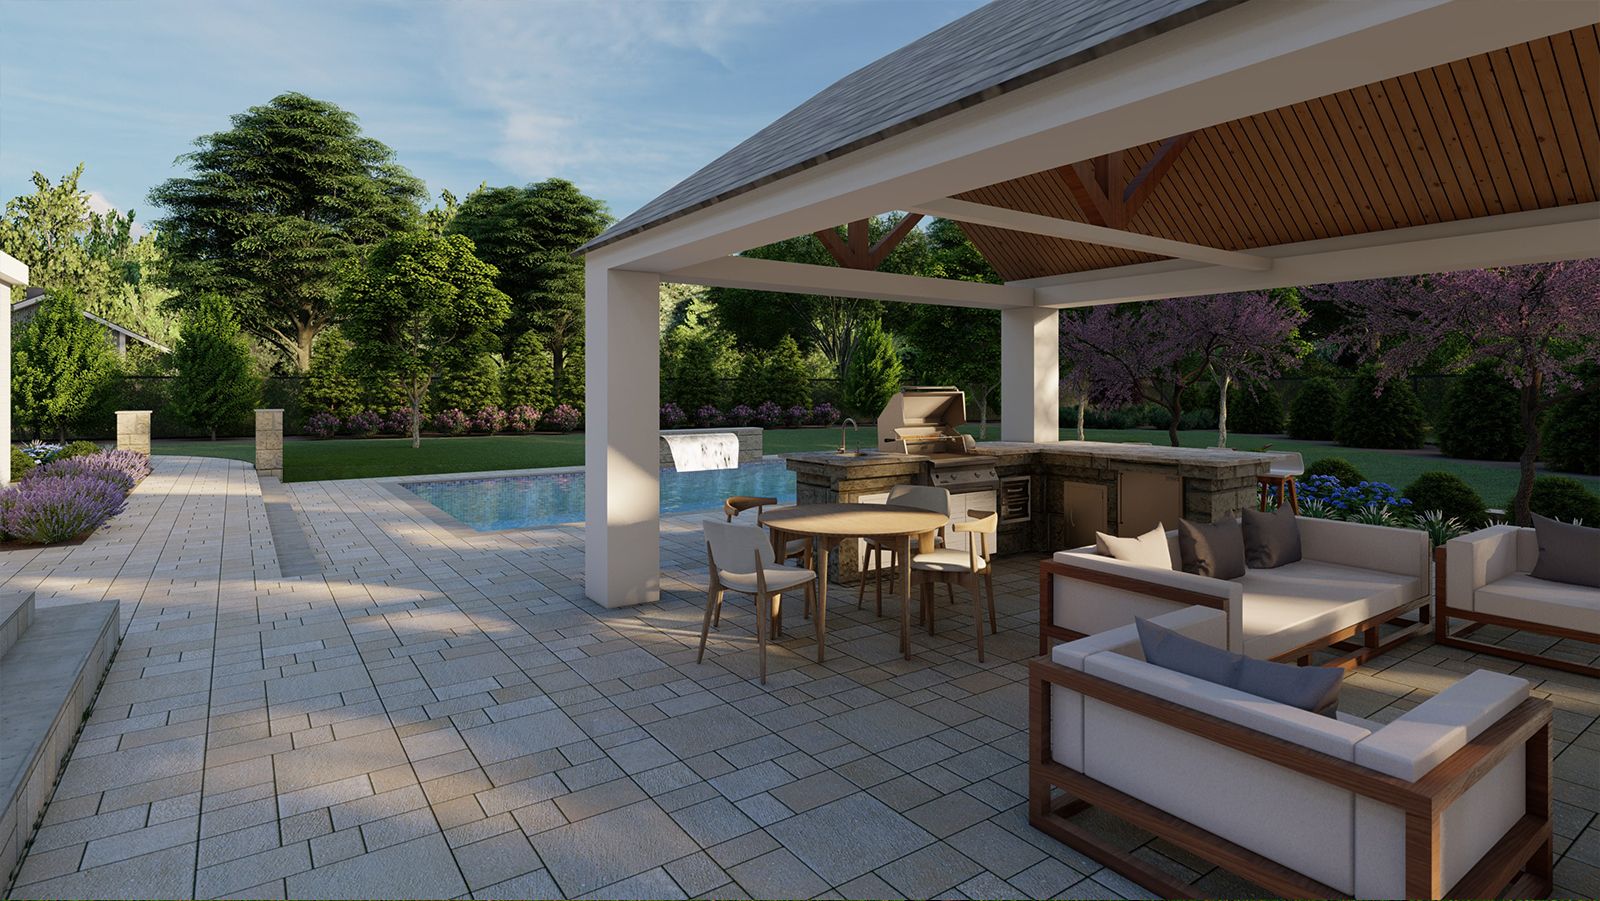 a stone patio with a pavilion and an outdoor fire place area and pool